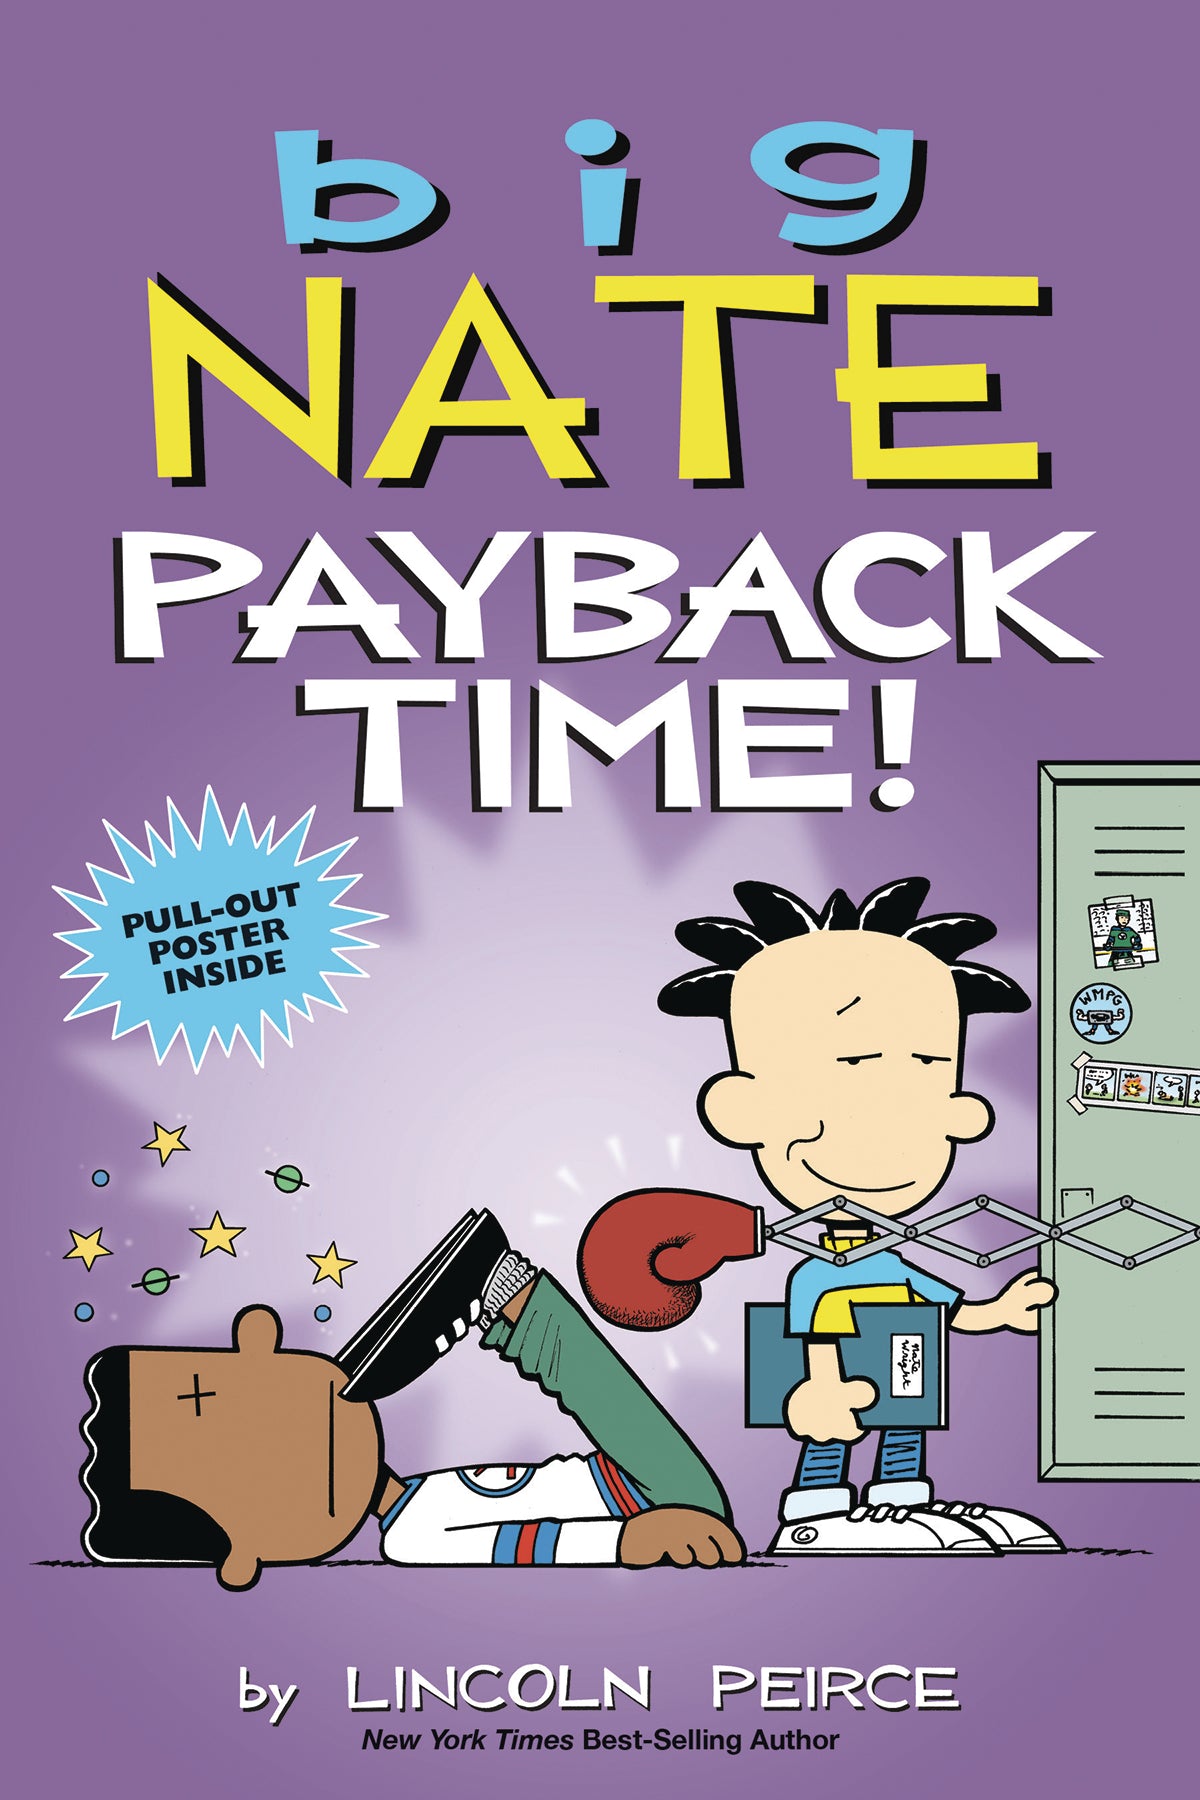 Big Nate Payback Time